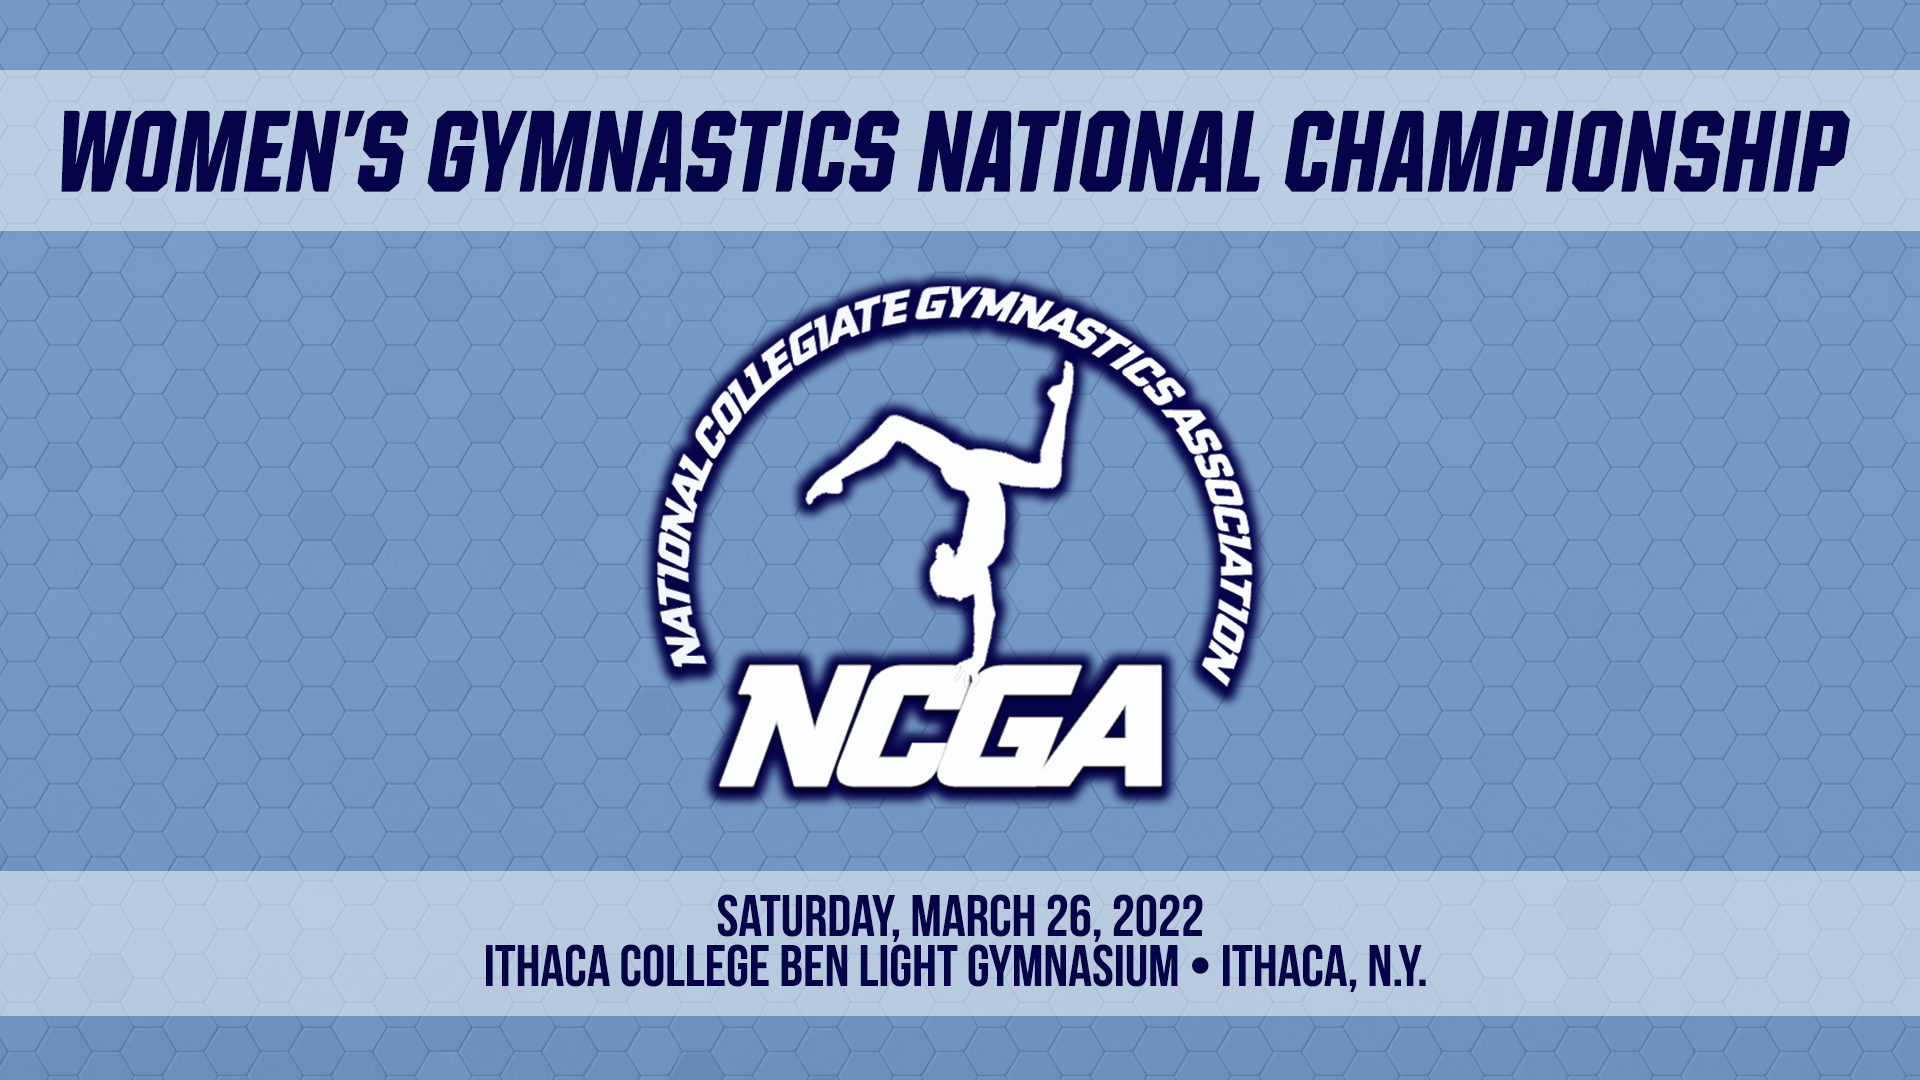 Titans Among Teams In Hunt For National Gymnastics Title